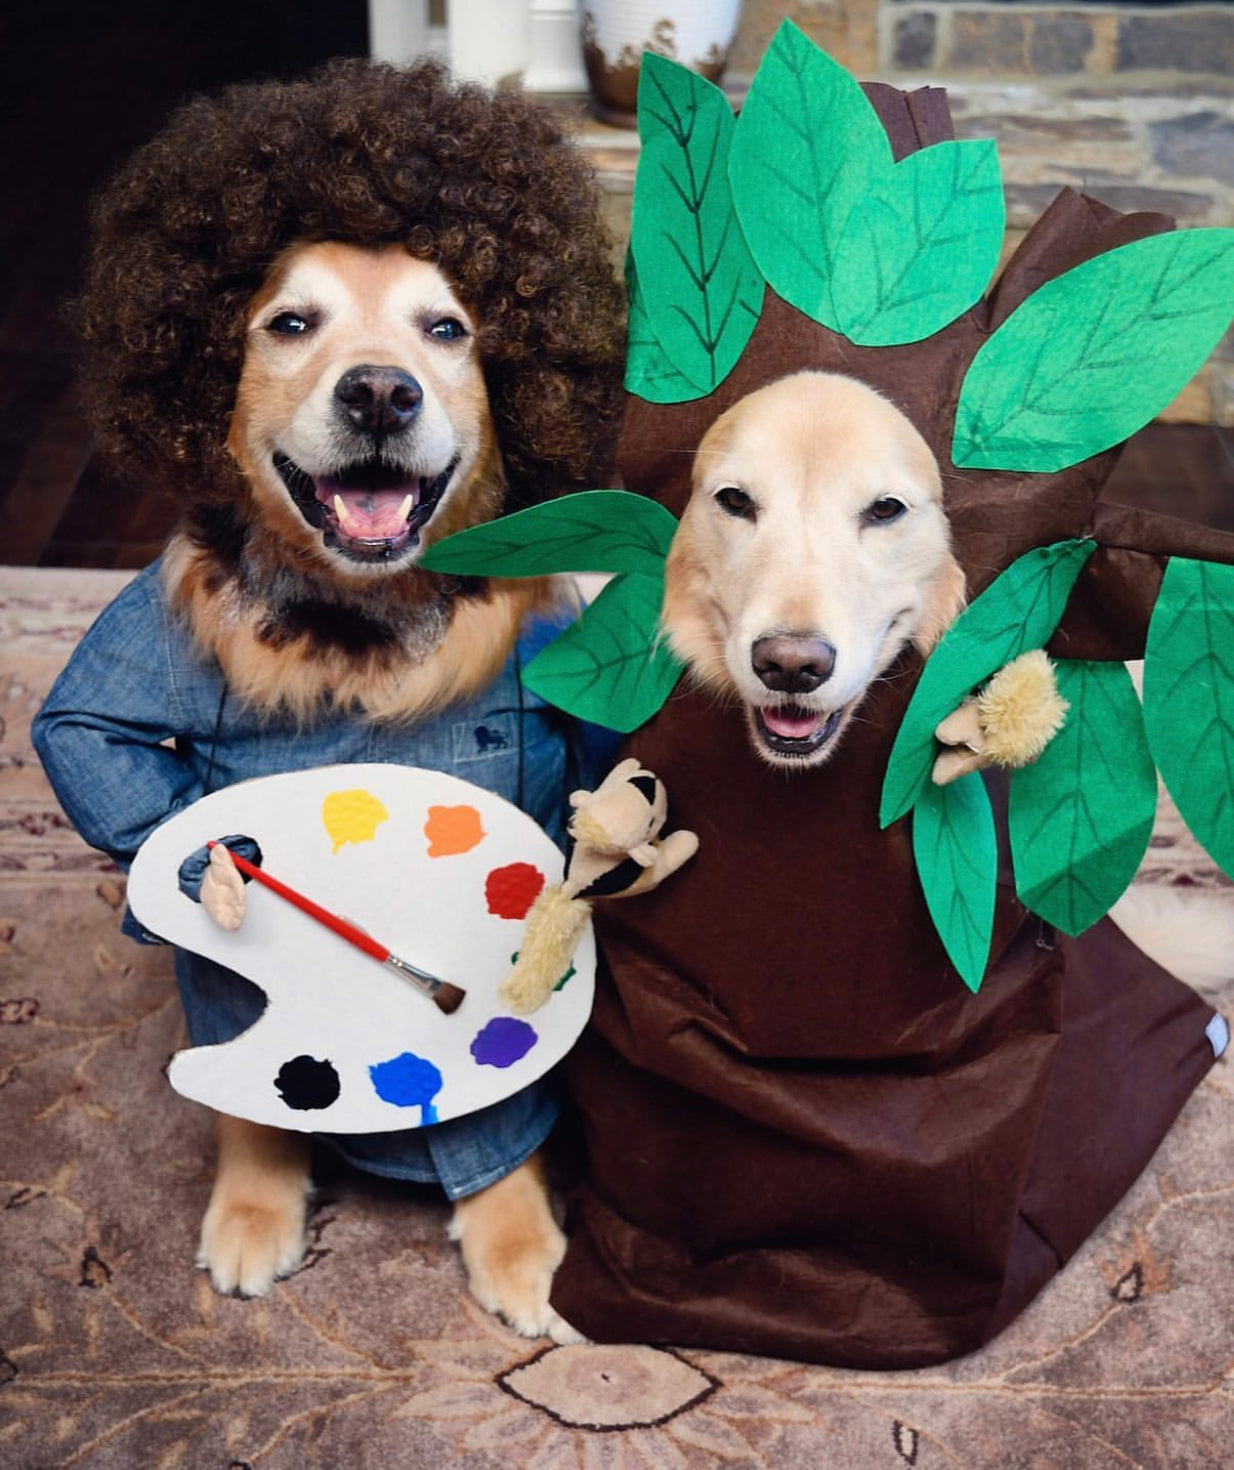 Five cute but spooky Halloween costumes for your dog - Kent Live